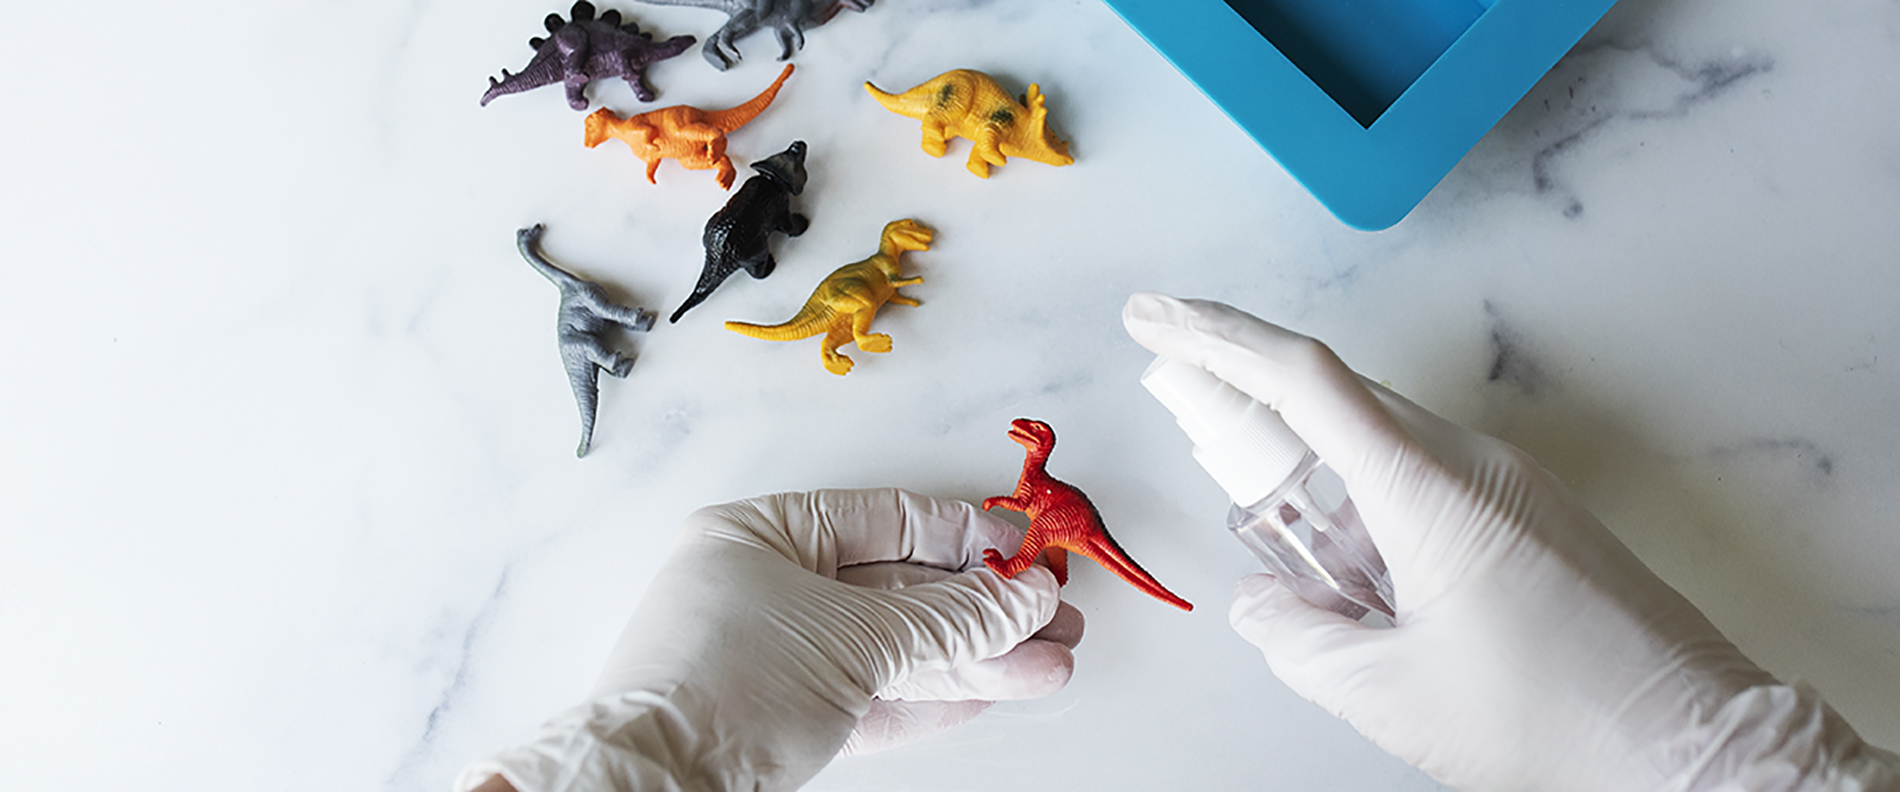 Spraying toy dinosaurs with rubbing alcohol for soap making.